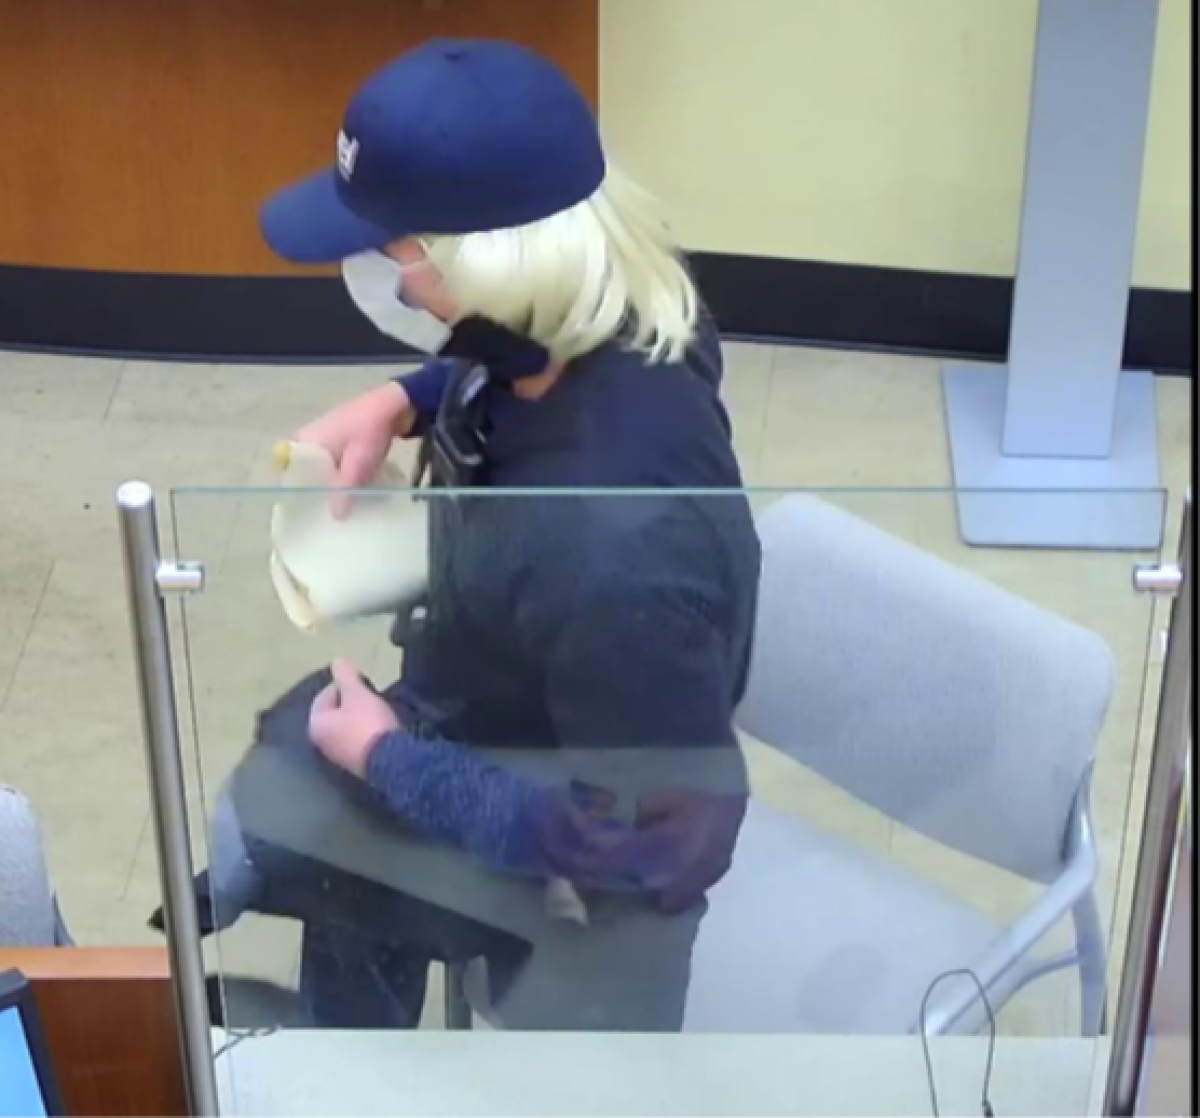 The FBI and San Diego police were searching for a man who they say robbed a bank teller in Scripps Ranch on Monday morning.